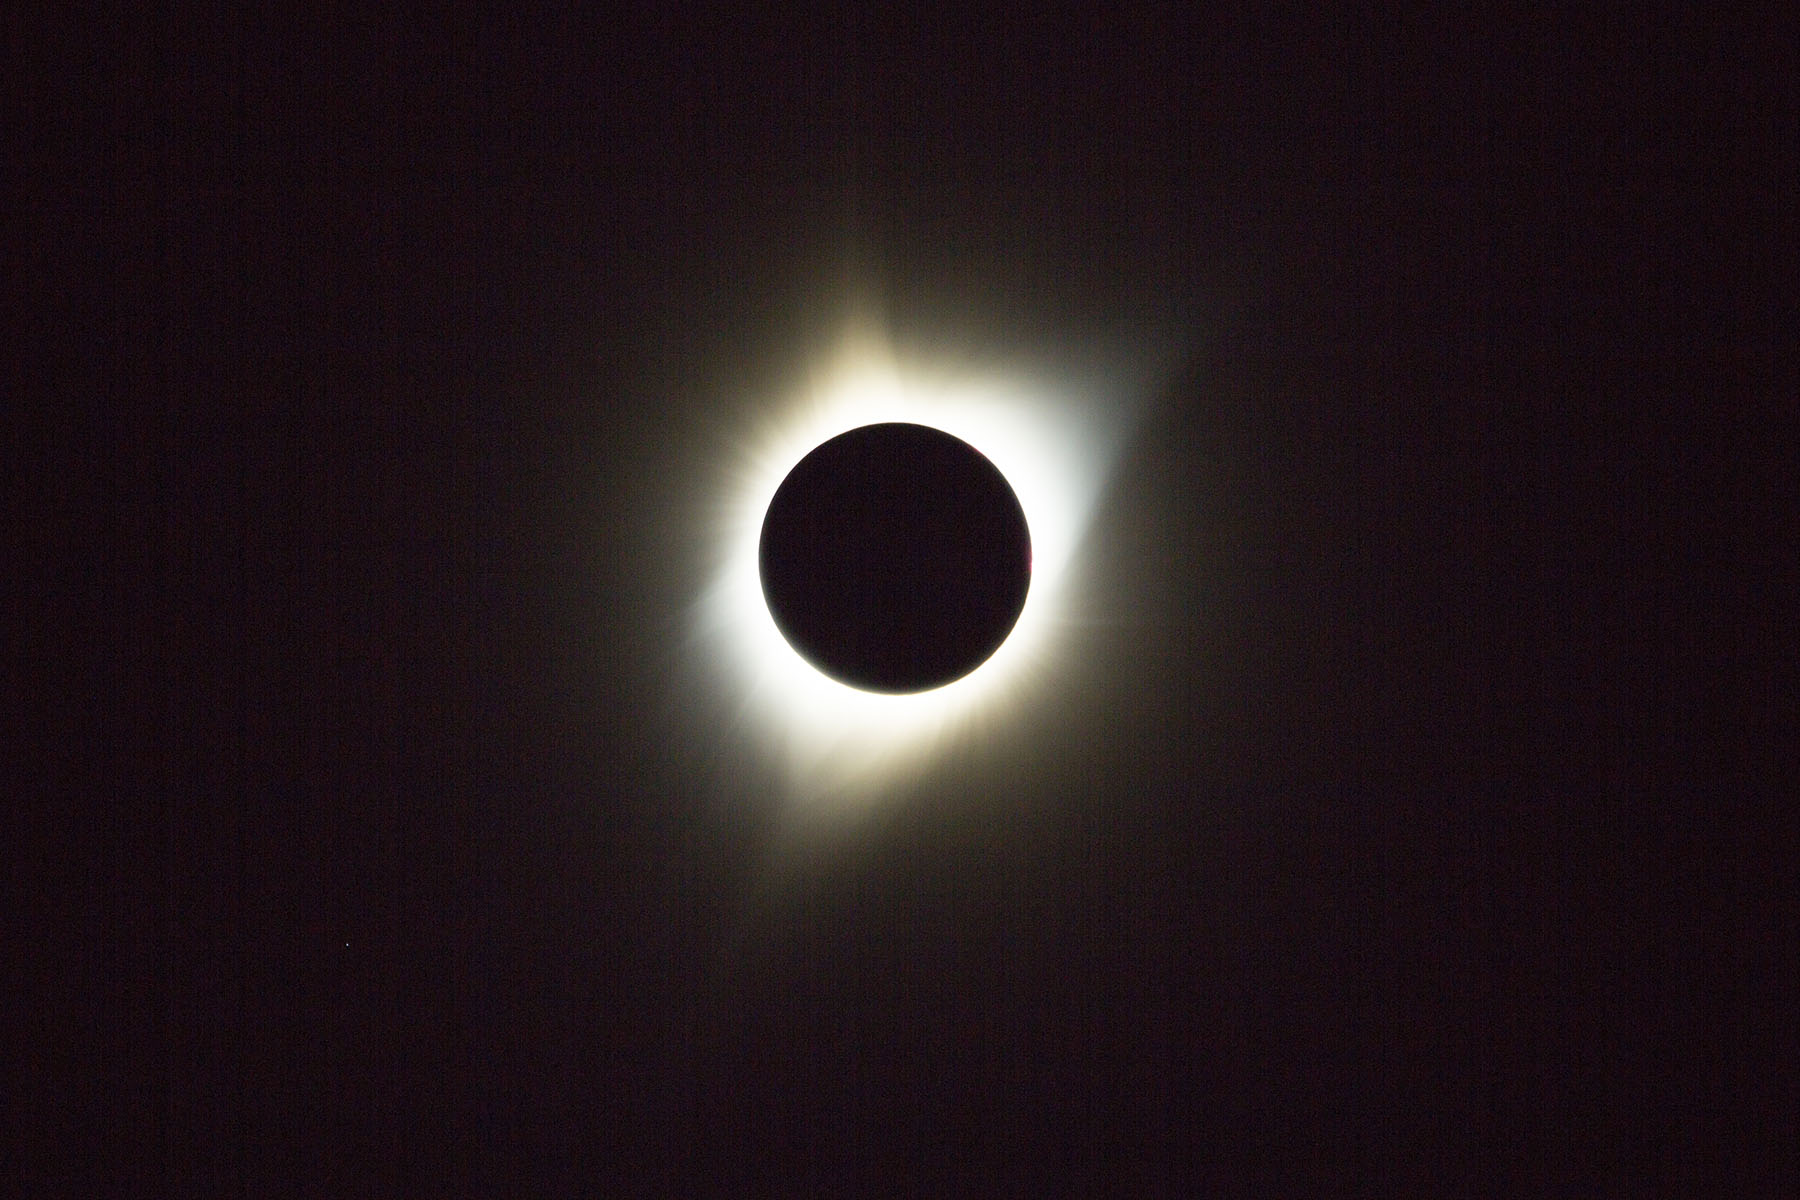 Photo of the sun totally obscured by the moon during a total solar eclipse